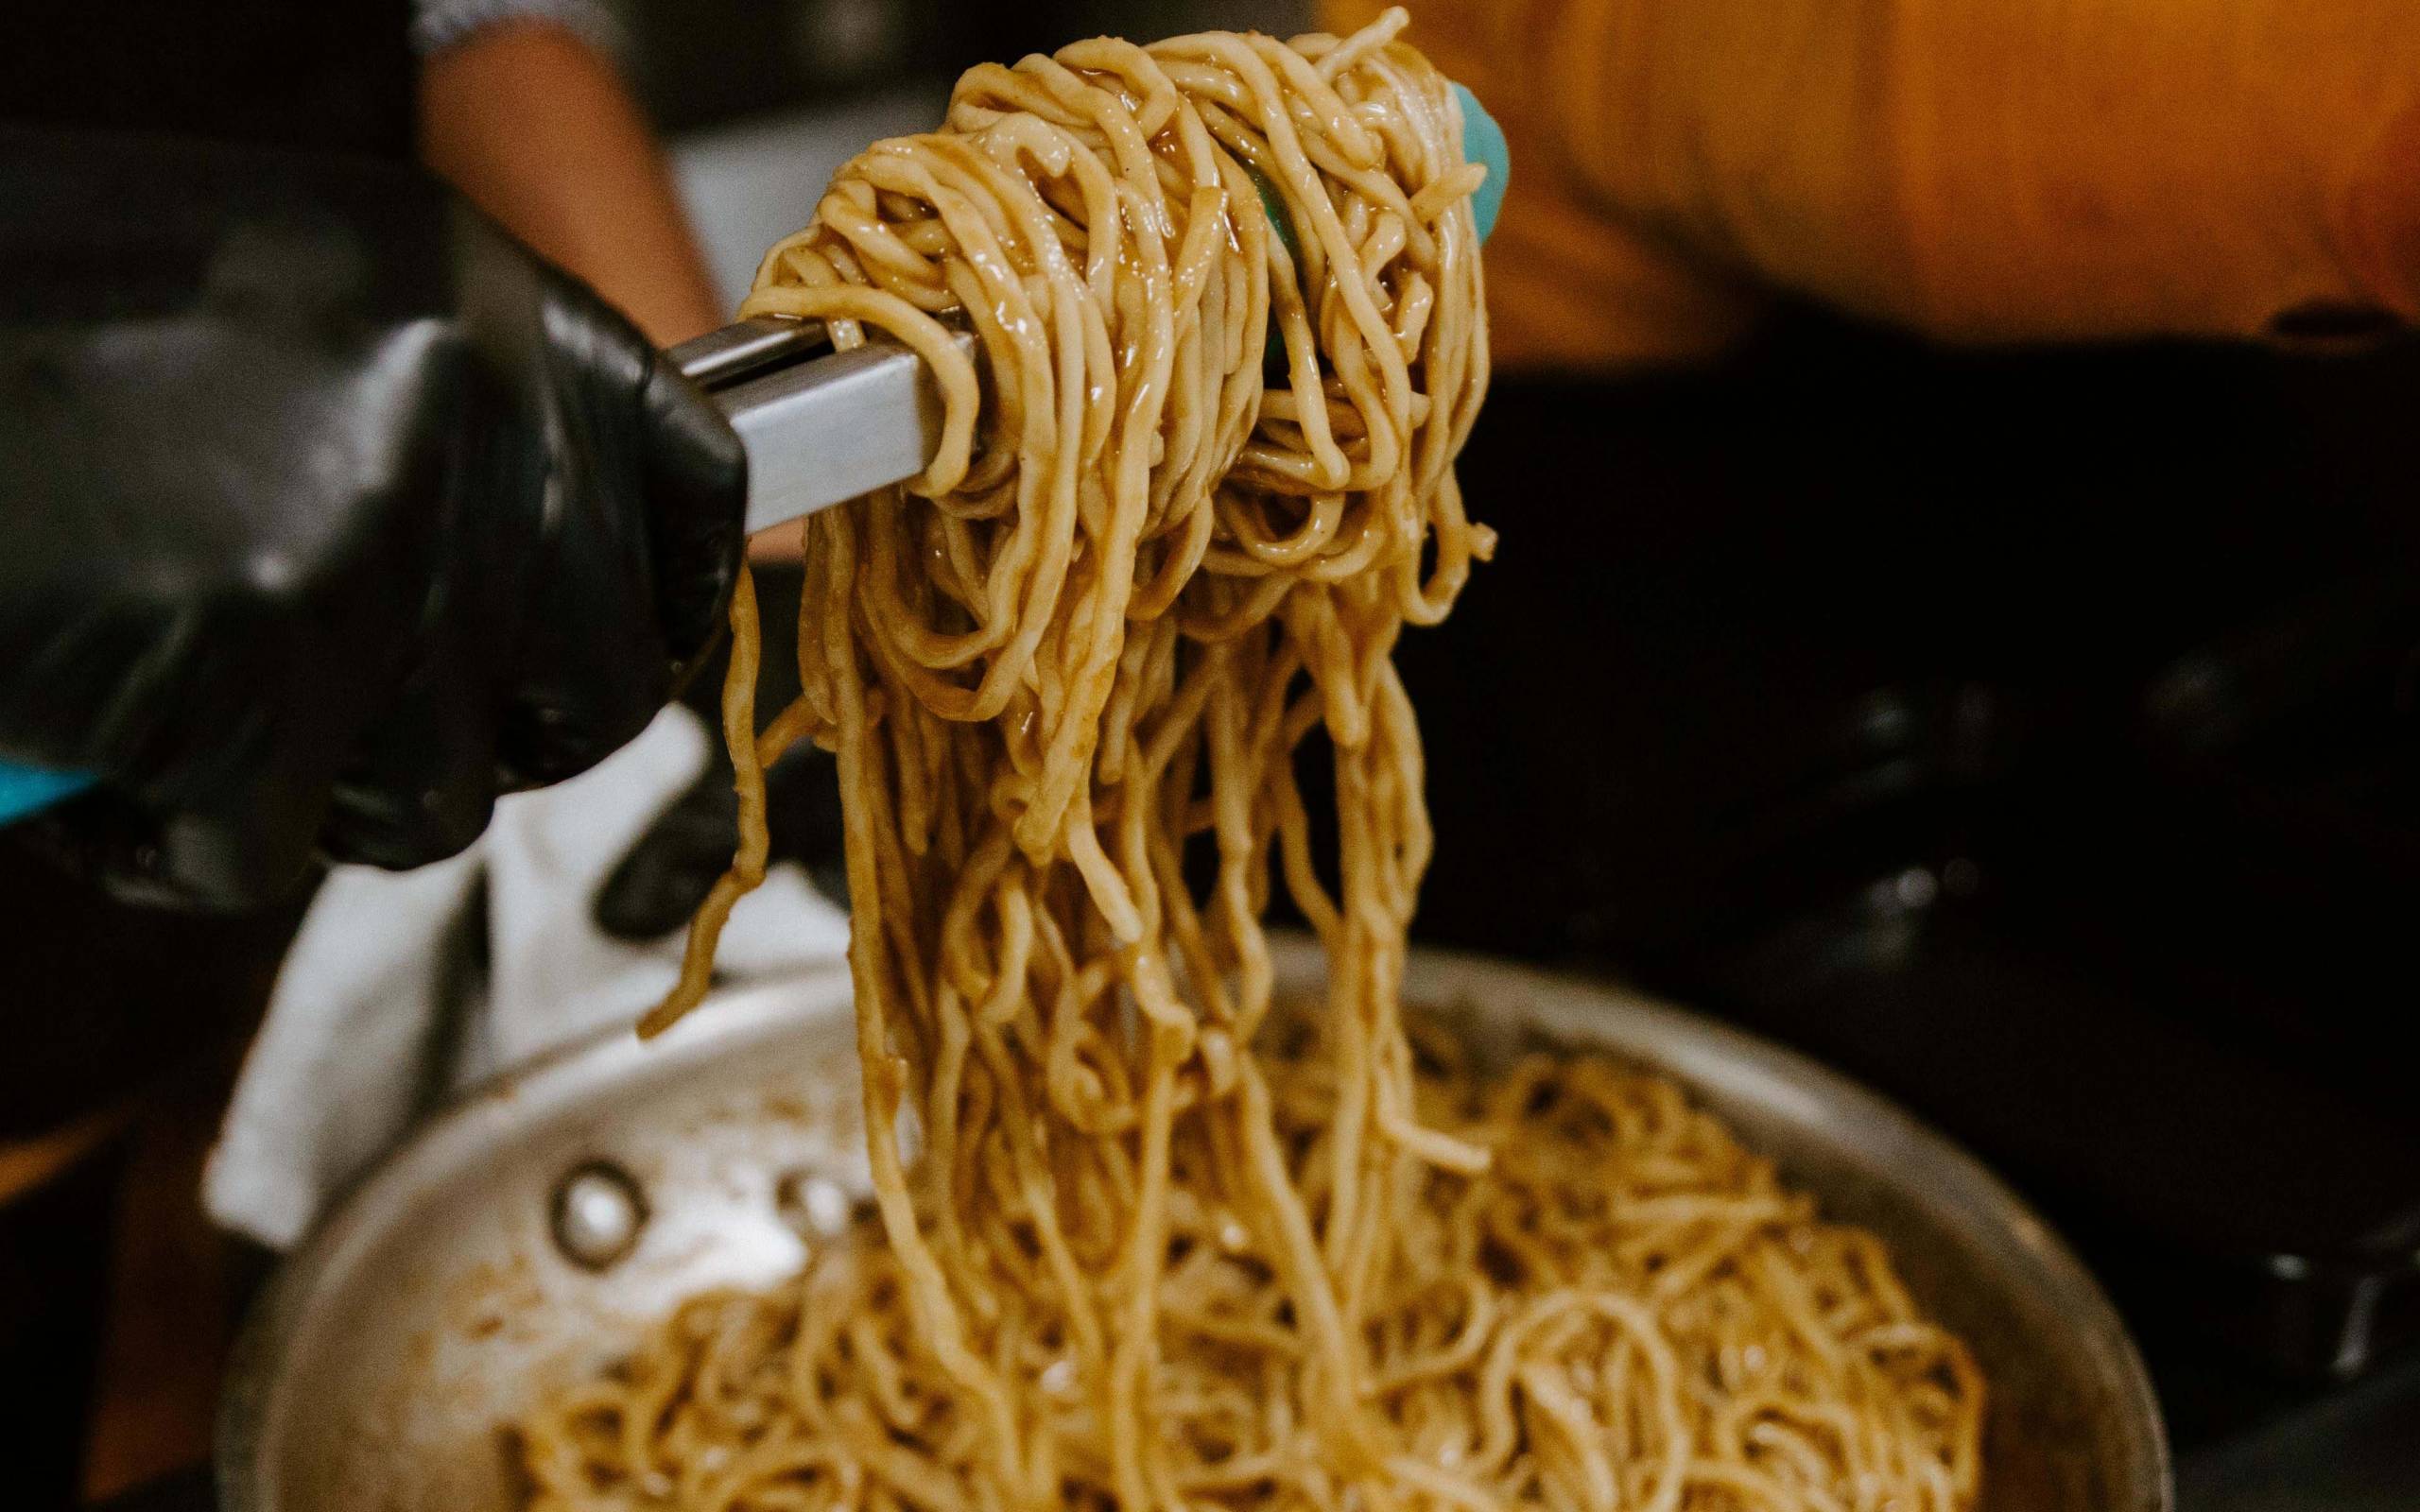 Saucy garlic noodles are mixed with a pair of tongs at Noodle Belly.